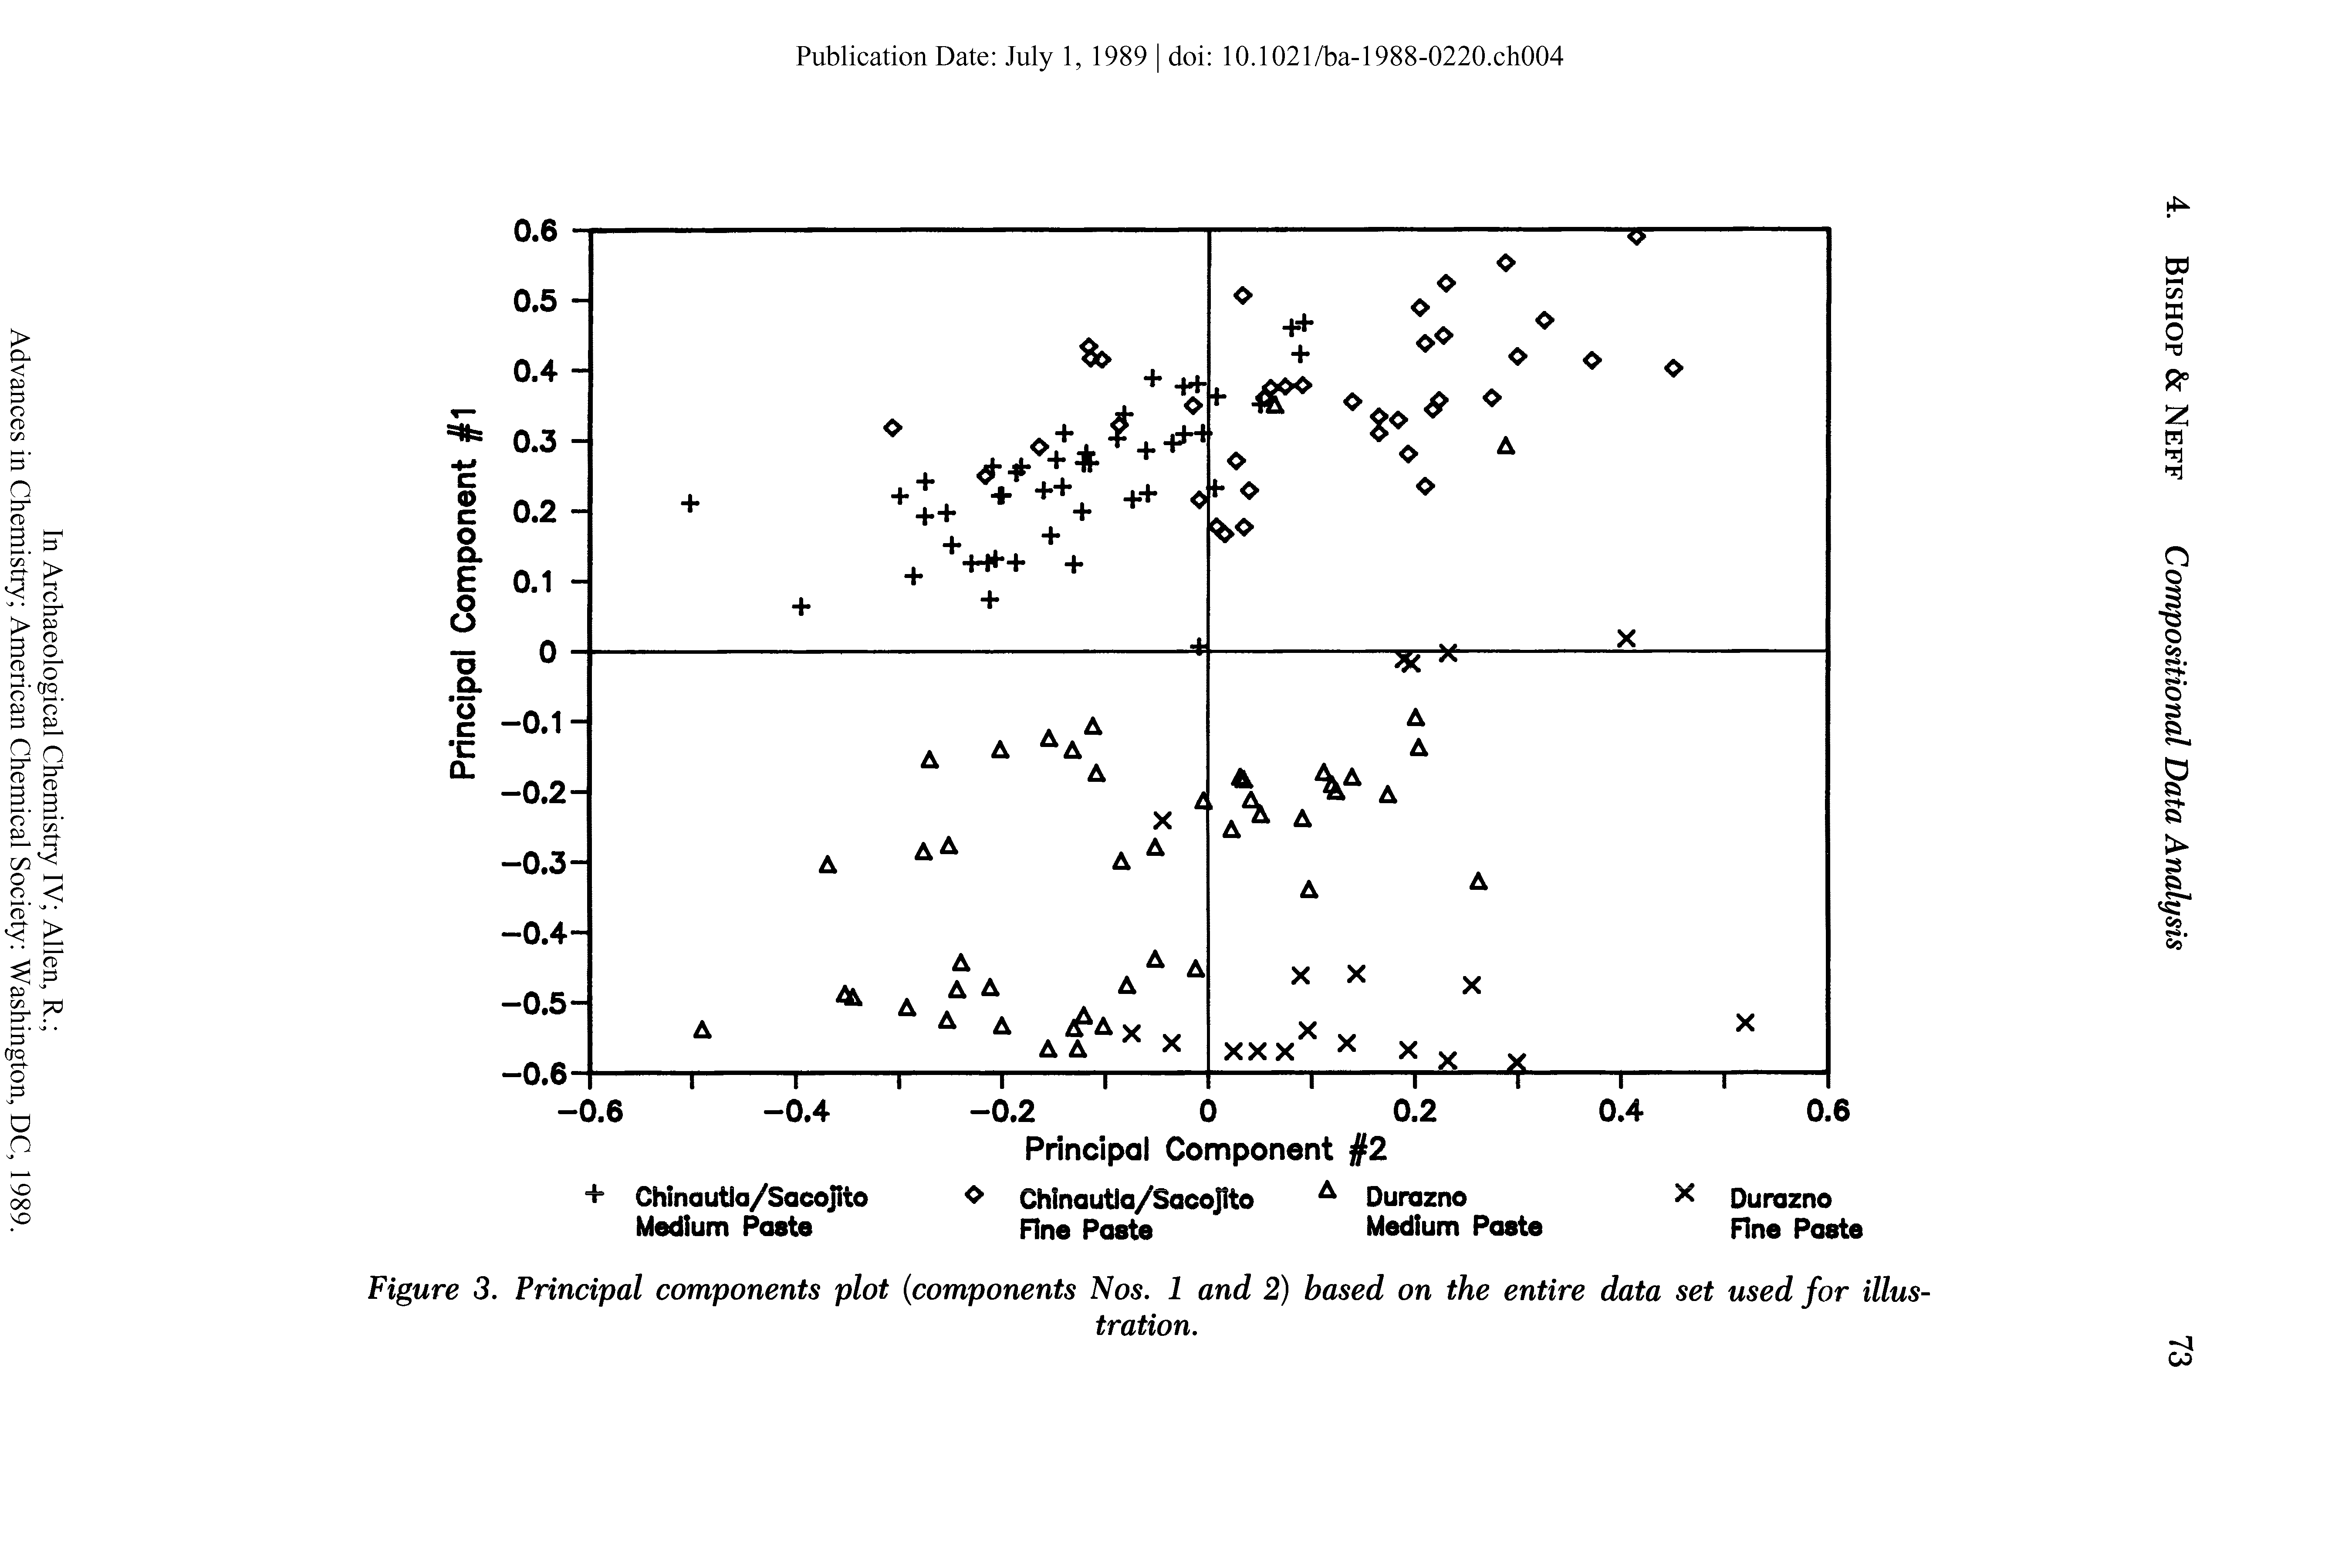 Figure 3. Principal components plot (components Nos. 1 and 2) based on the entire data set used for illustration.